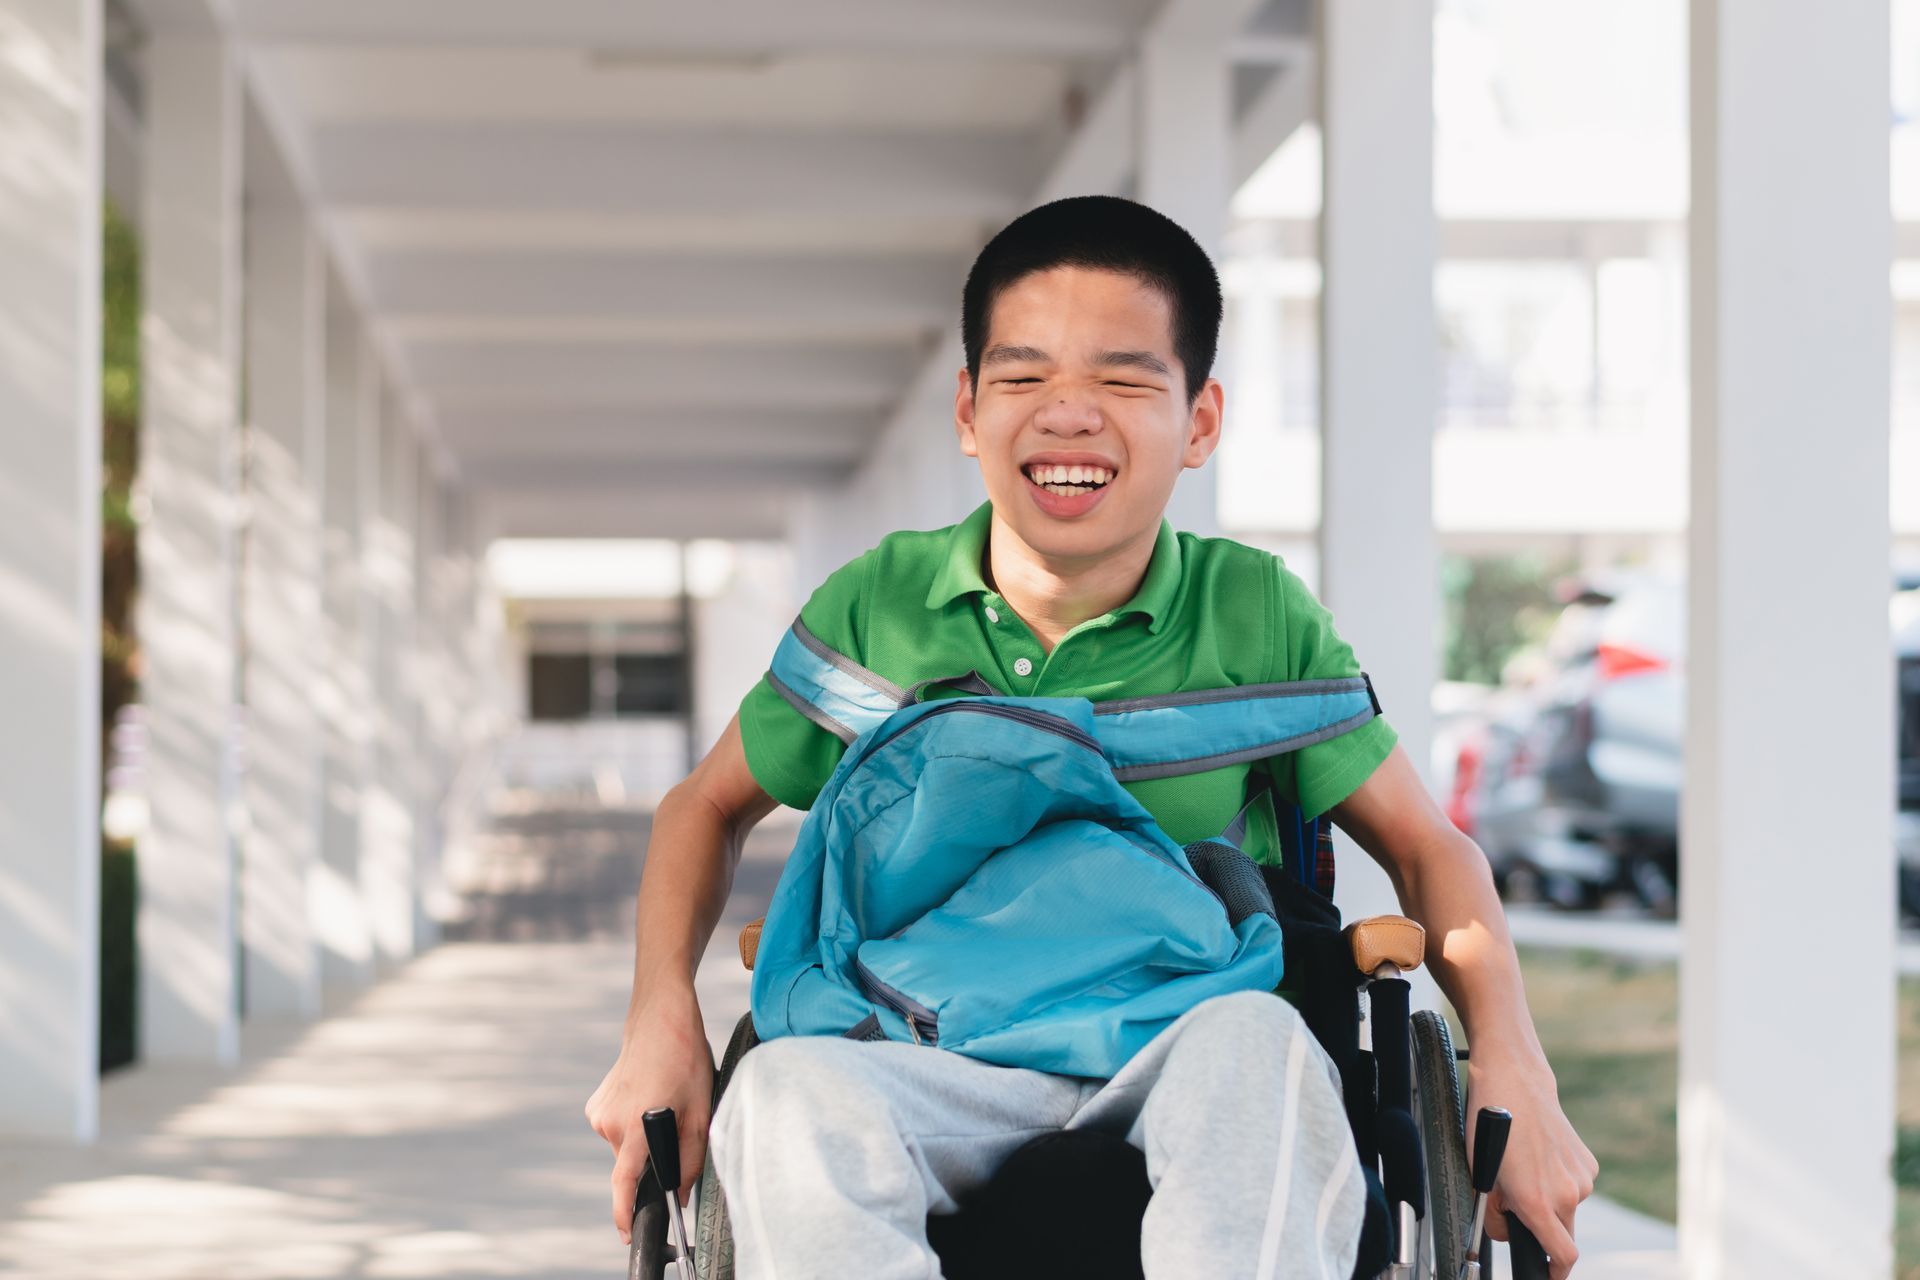 Child with CP with school backback on lap in wheelchair smiling